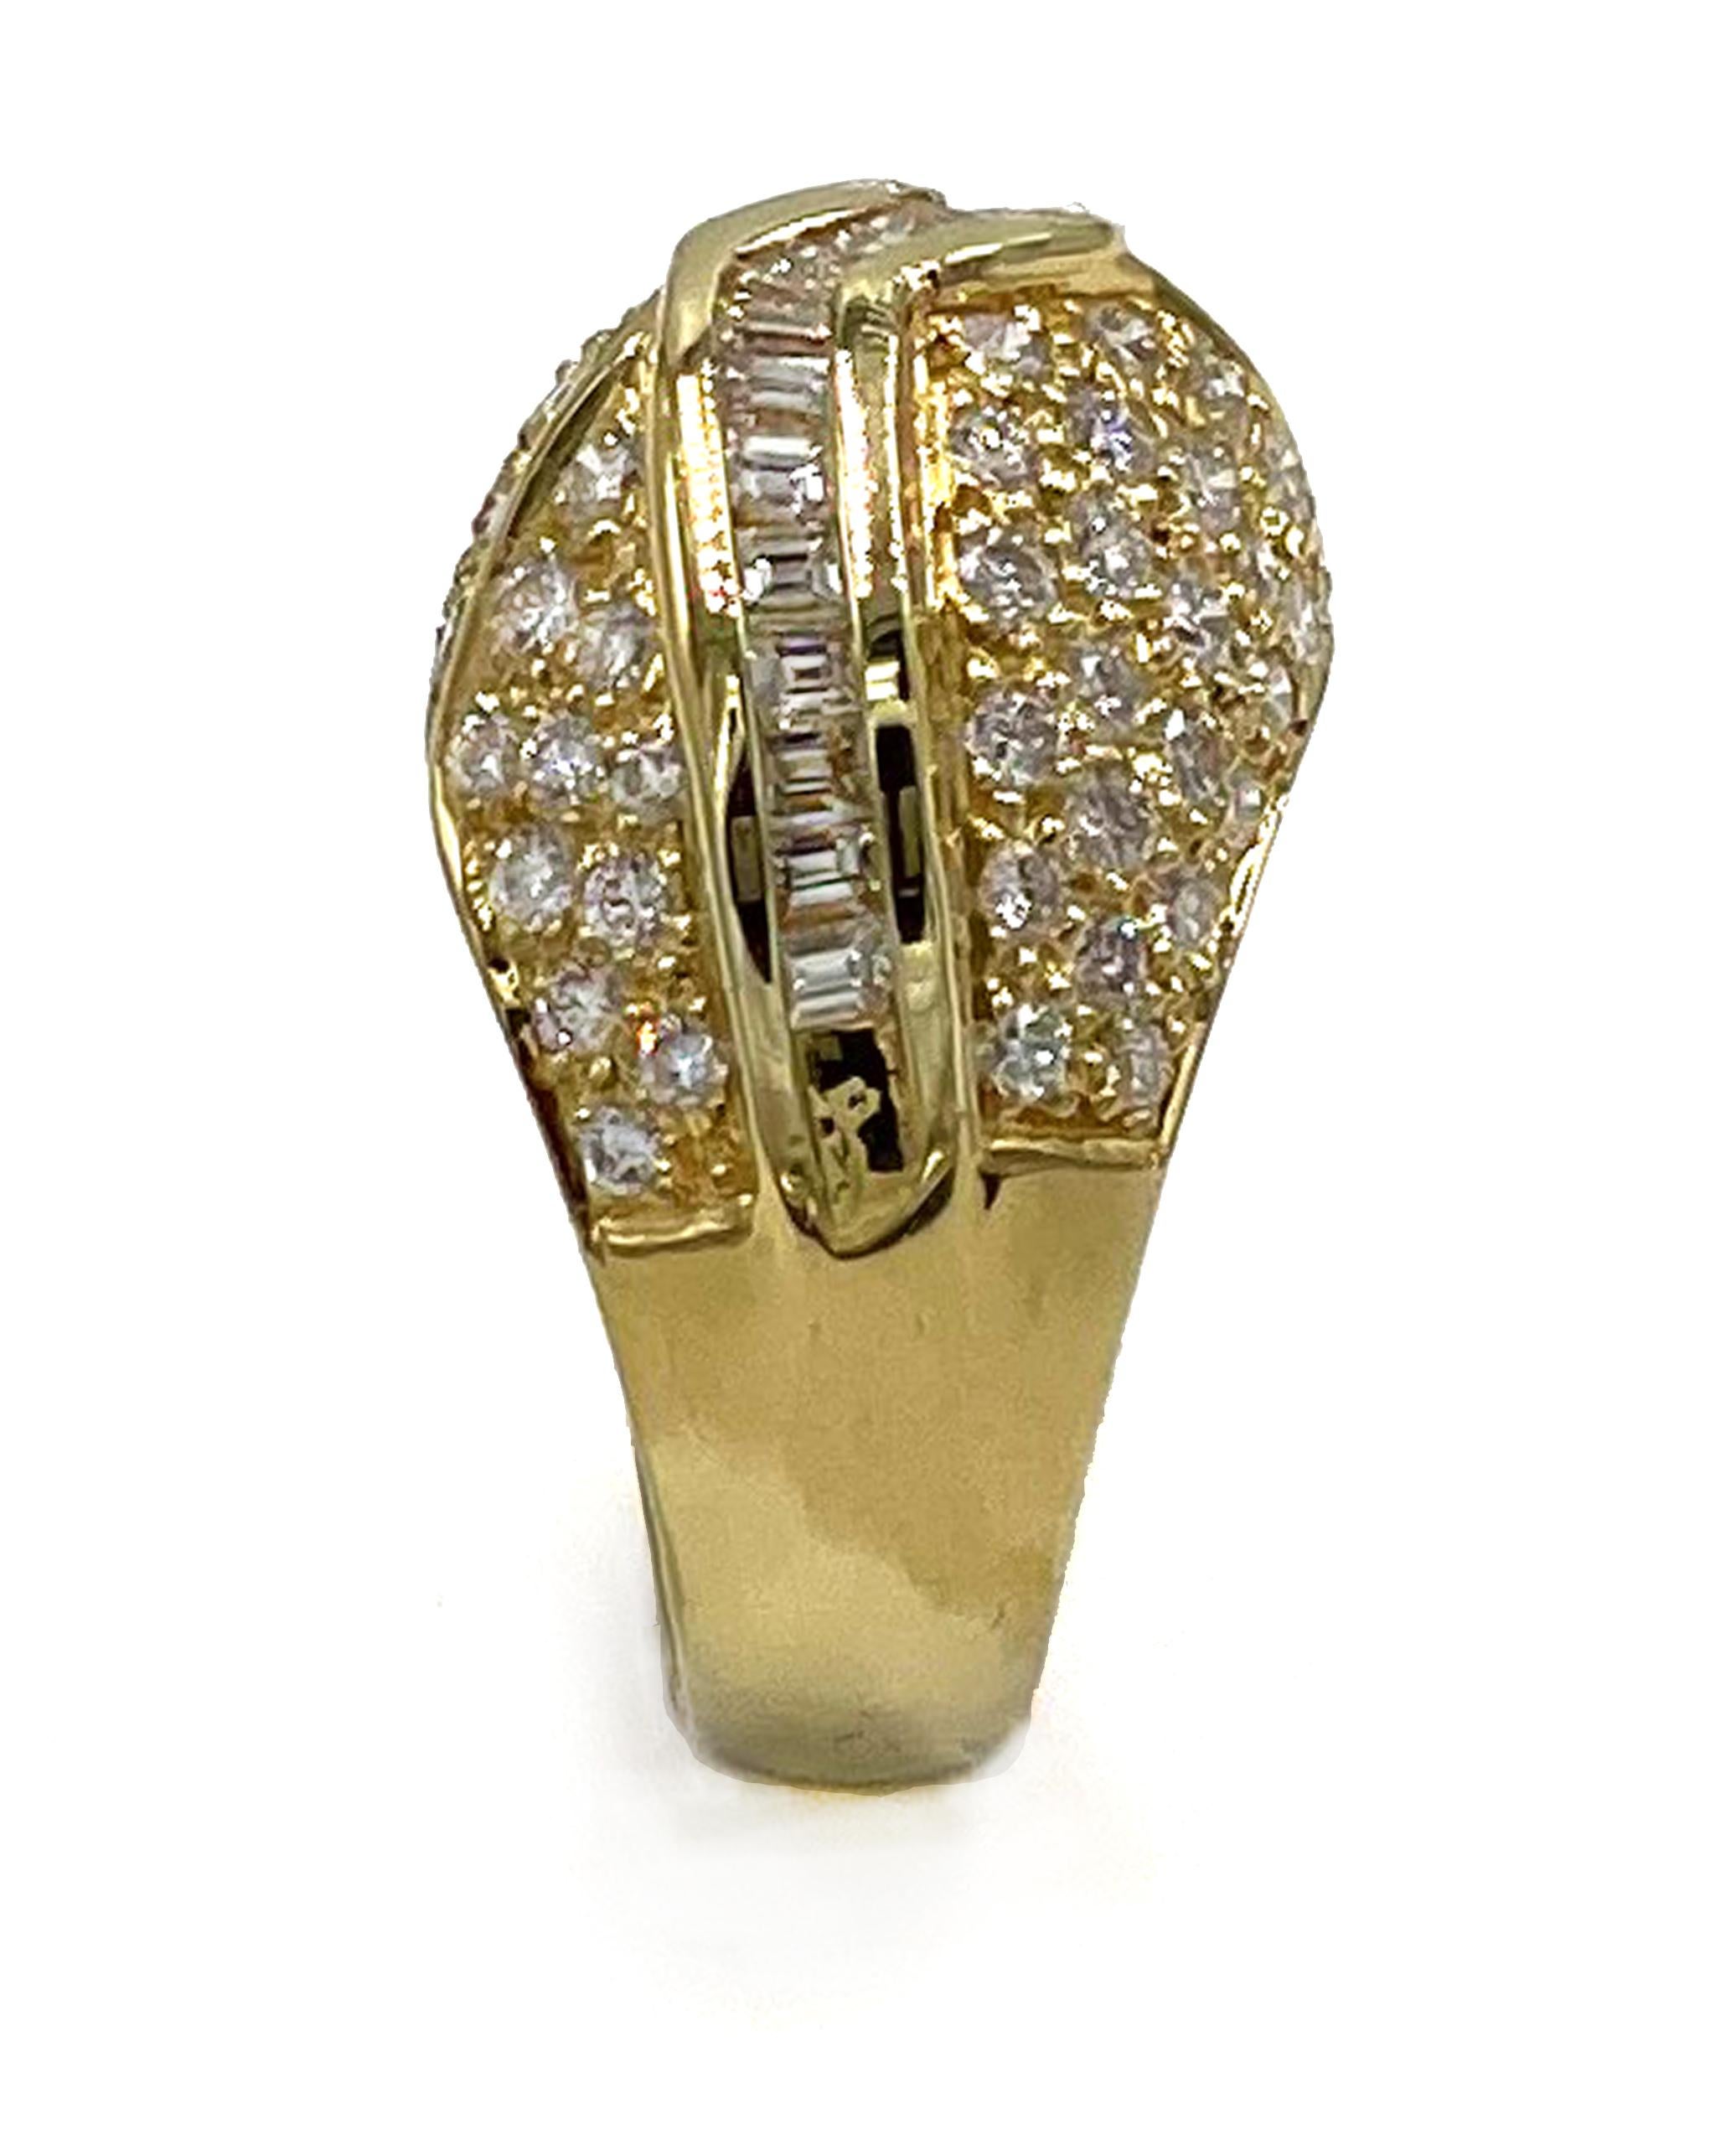 Vintage 18K yellow gold ring with 32 baguette diamonds and 64 round diamonds, all totaling 1.90 carats. G/H color, VS clarity. (Created circa 1985)

-Finger size: 6.25